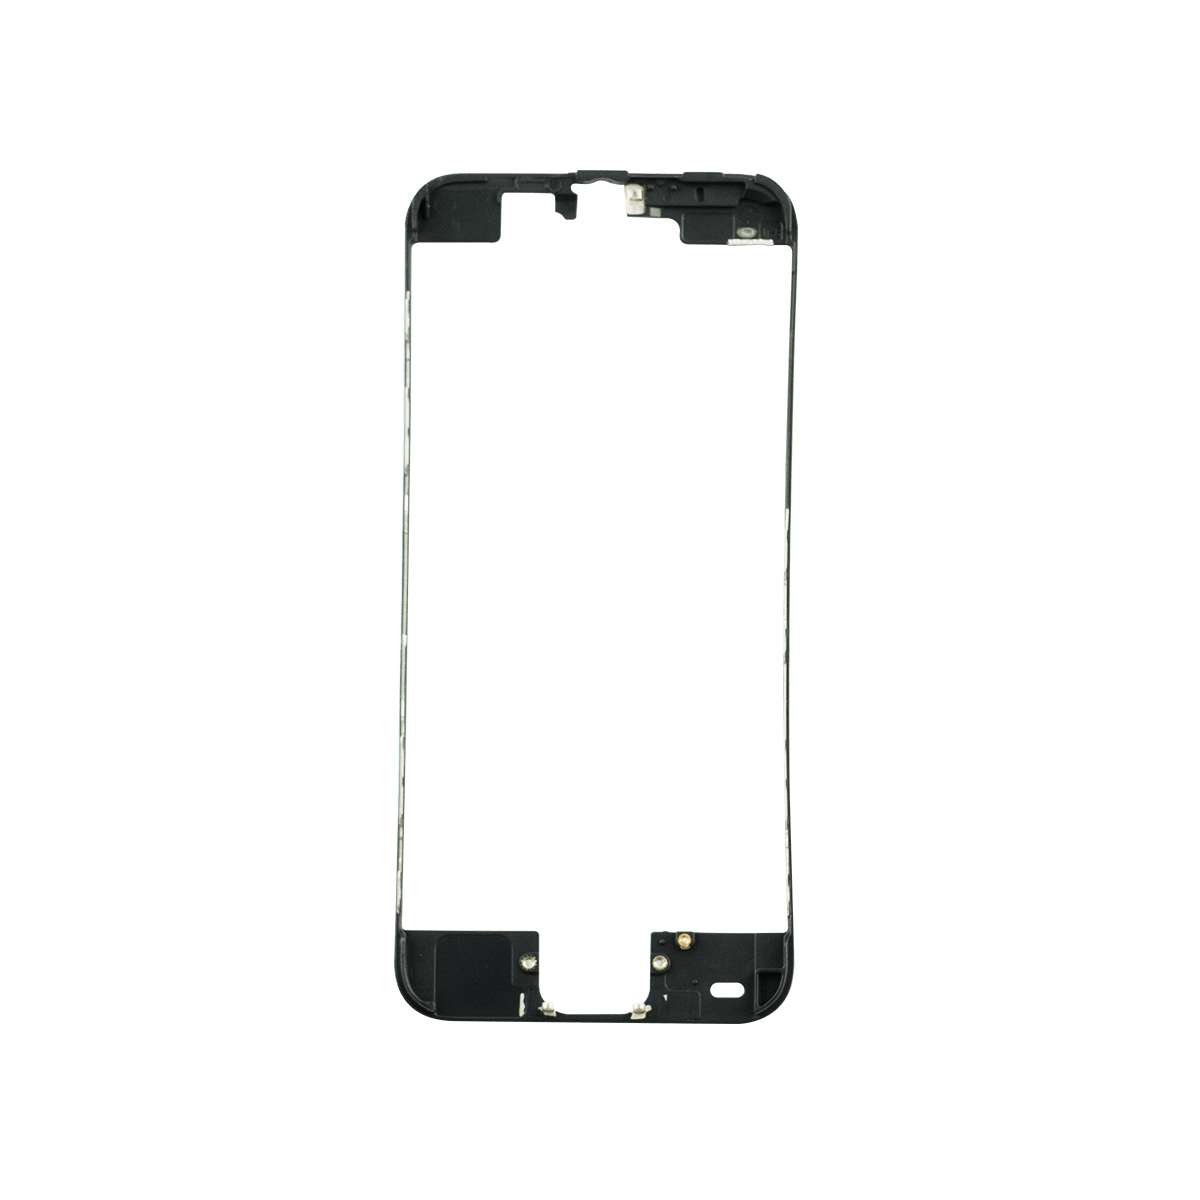 iPhone 5c Frame with Hot Glue